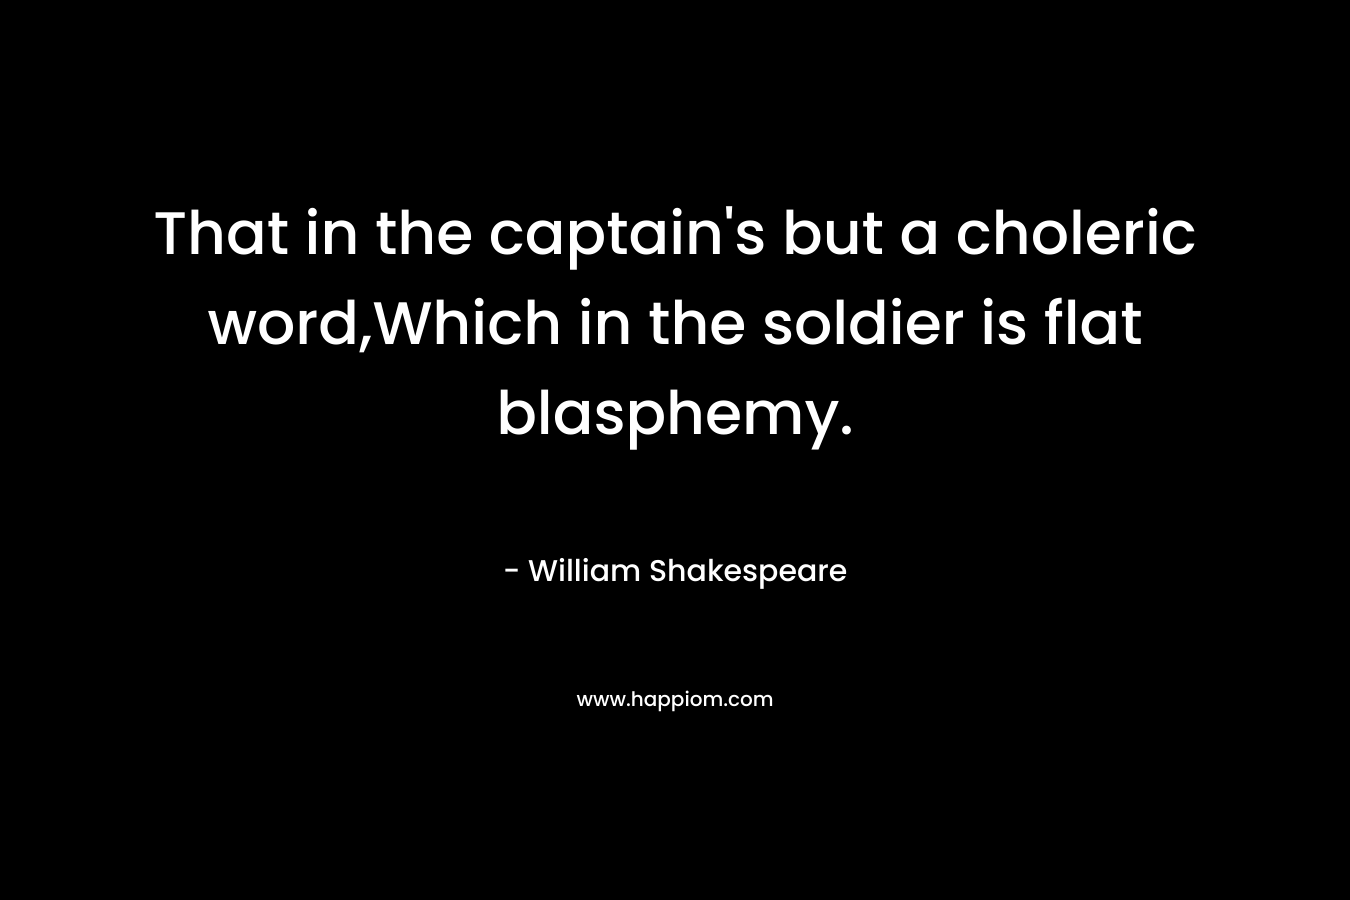 That in the captain’s but a choleric word,Which in the soldier is flat blasphemy. – William Shakespeare